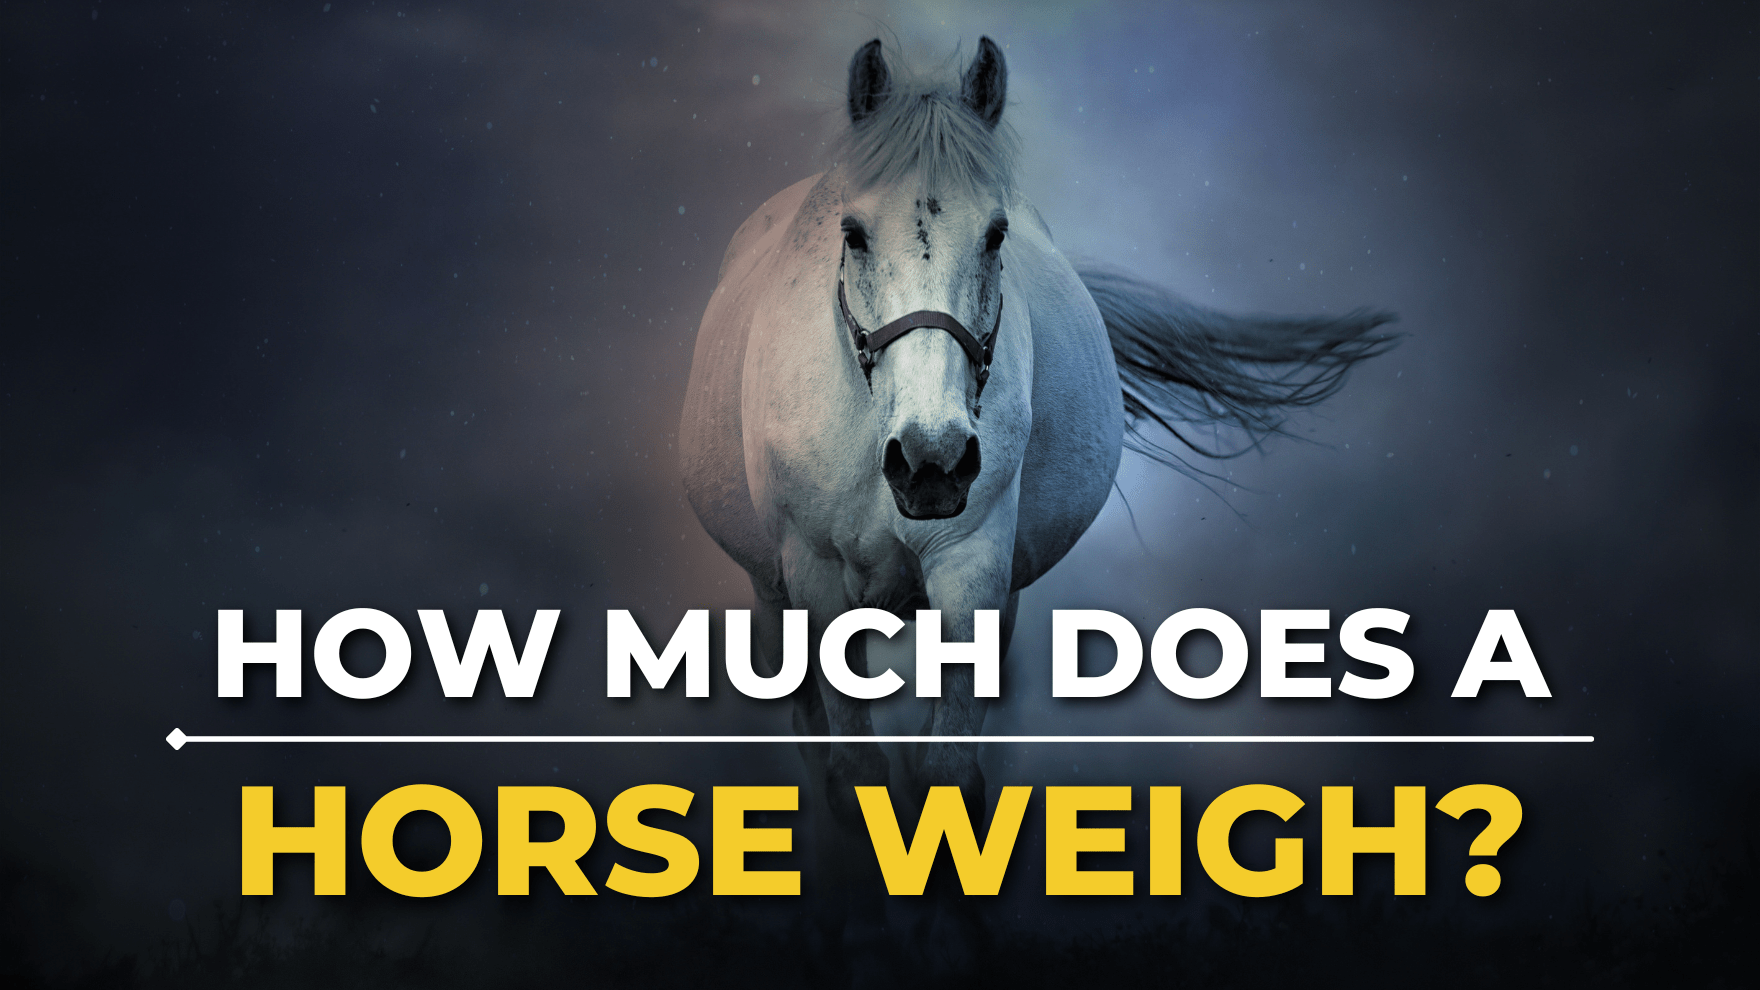 How Much Does a Horse Weigh?